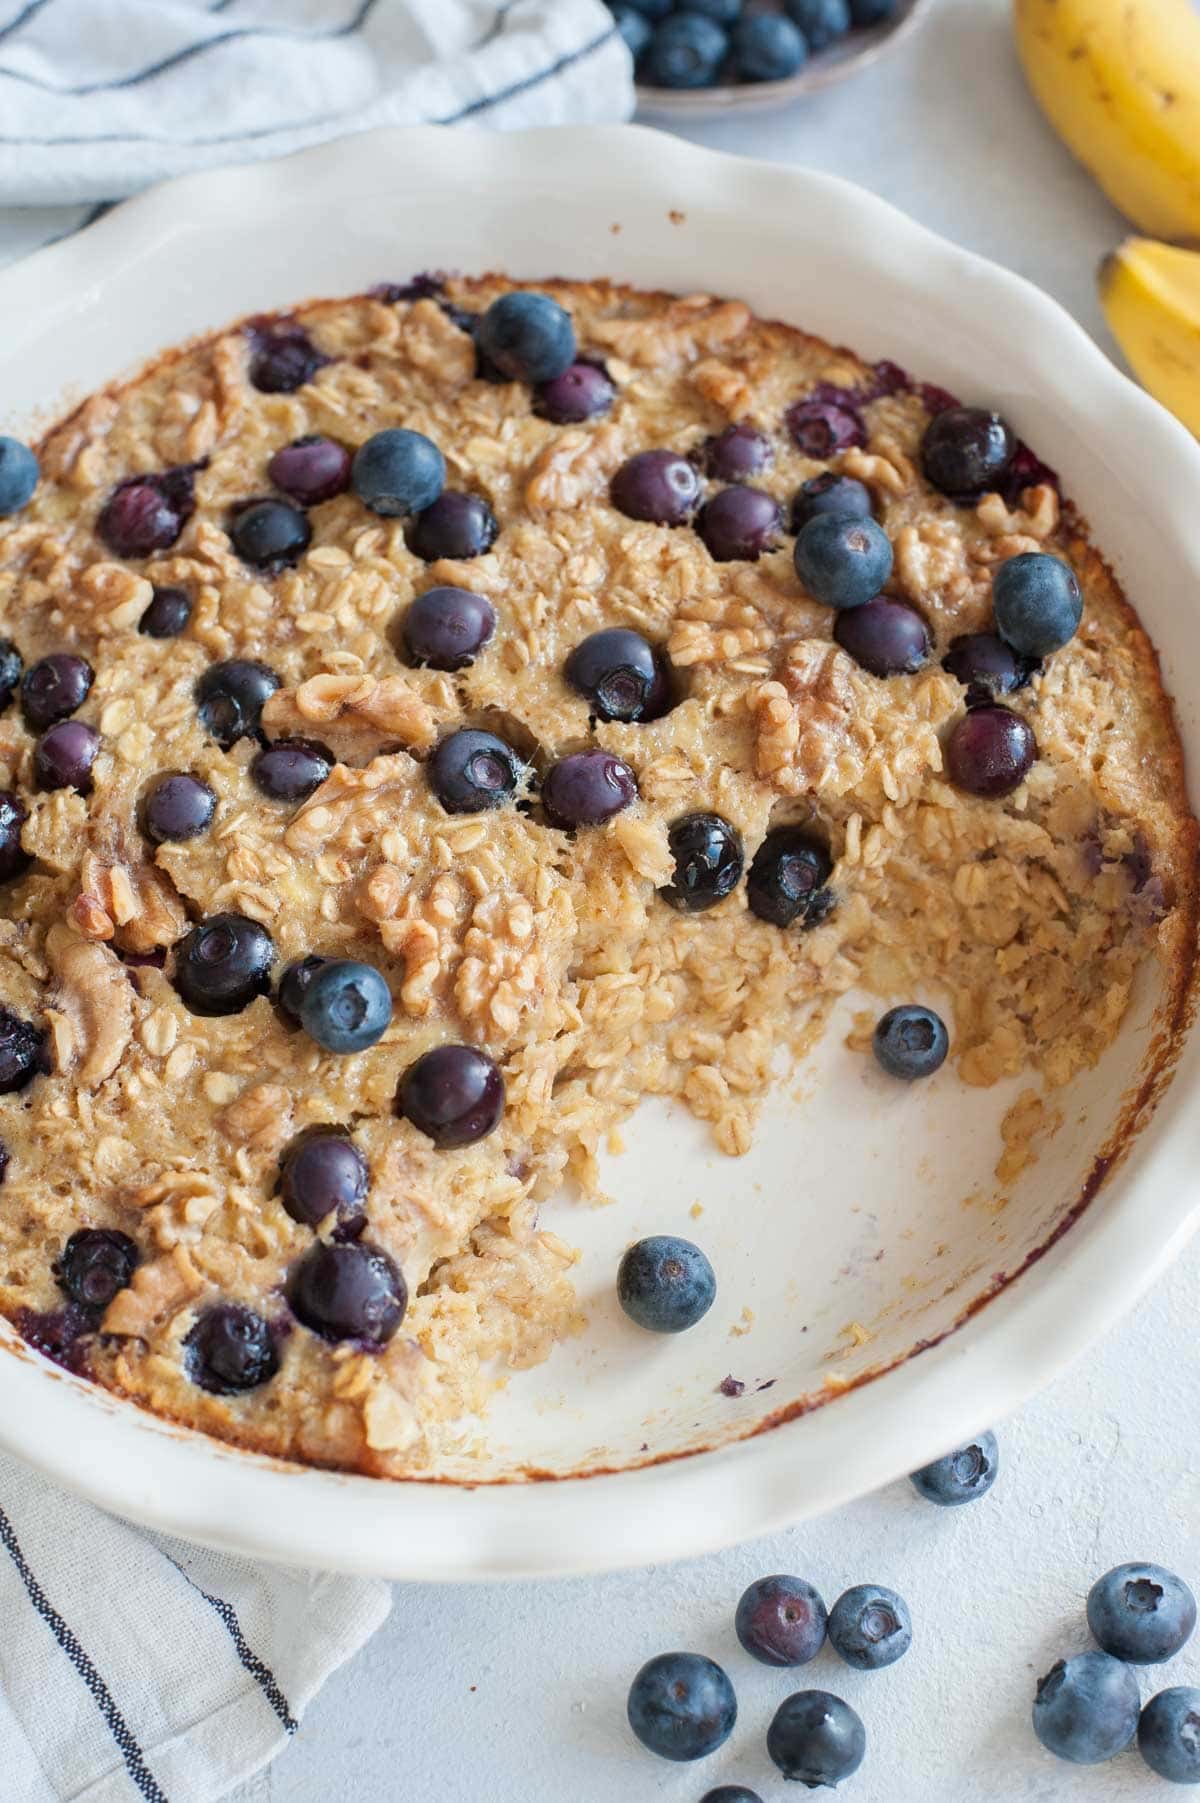 Banana blueberry baked oatmeal in a white baking dish with a serving missing.